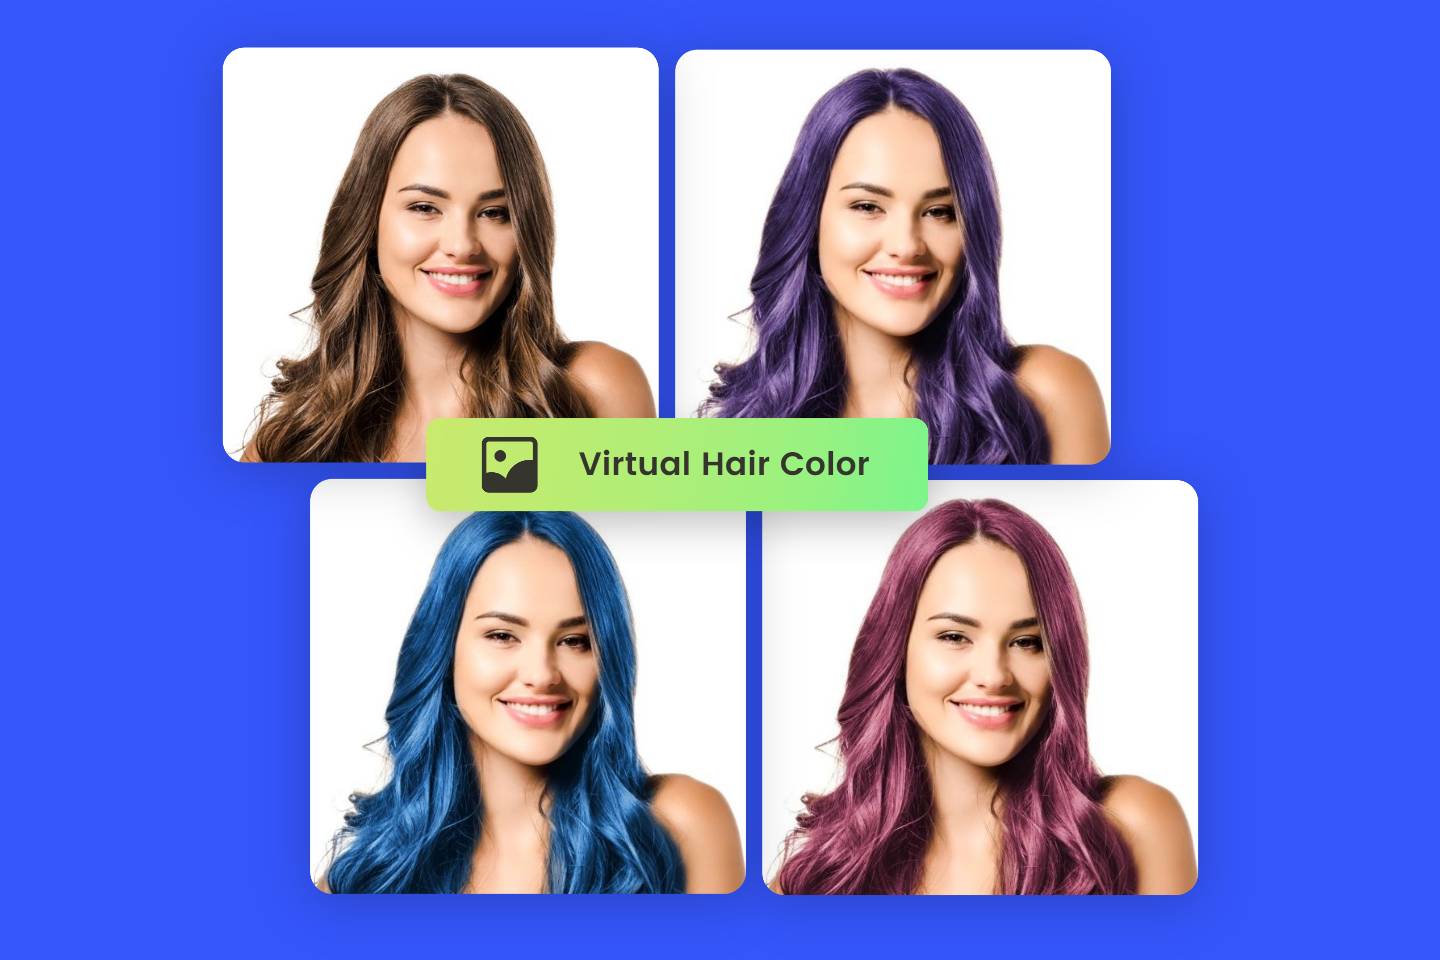 Try on different virtual hair colors with fotor online haircolor try on tool